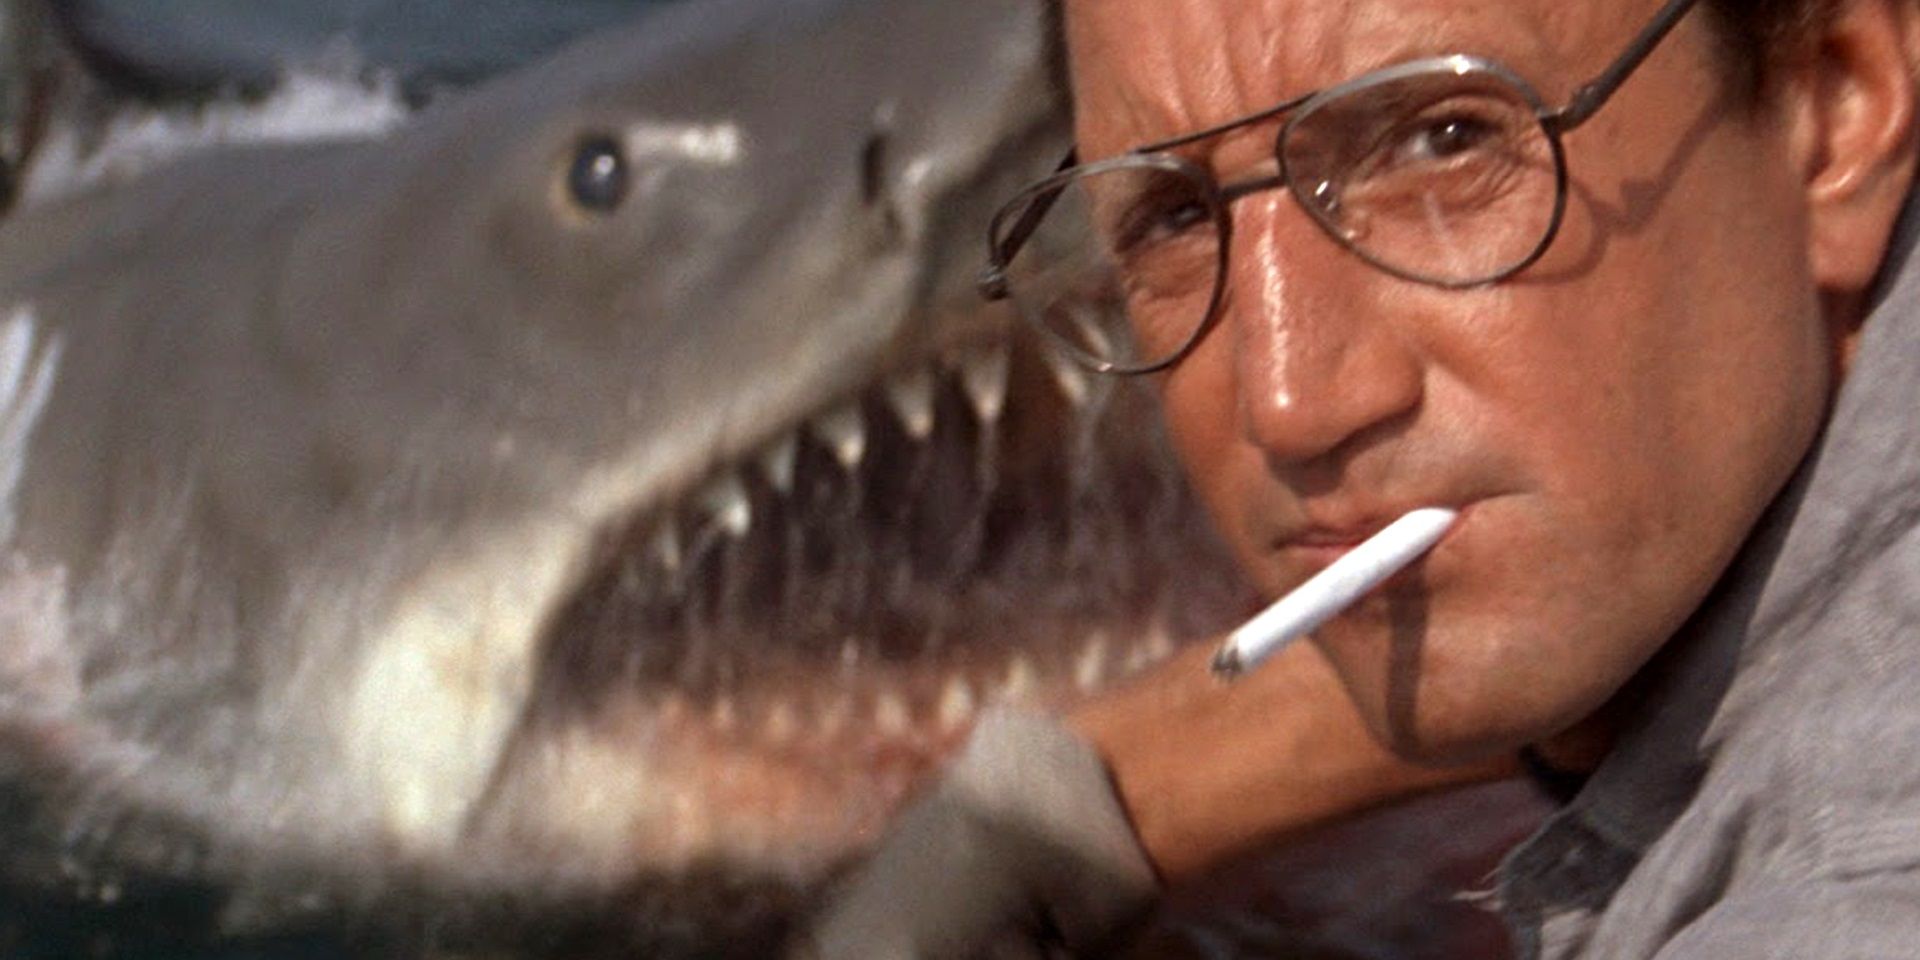 Chief Brody in front of the shark in Jaws